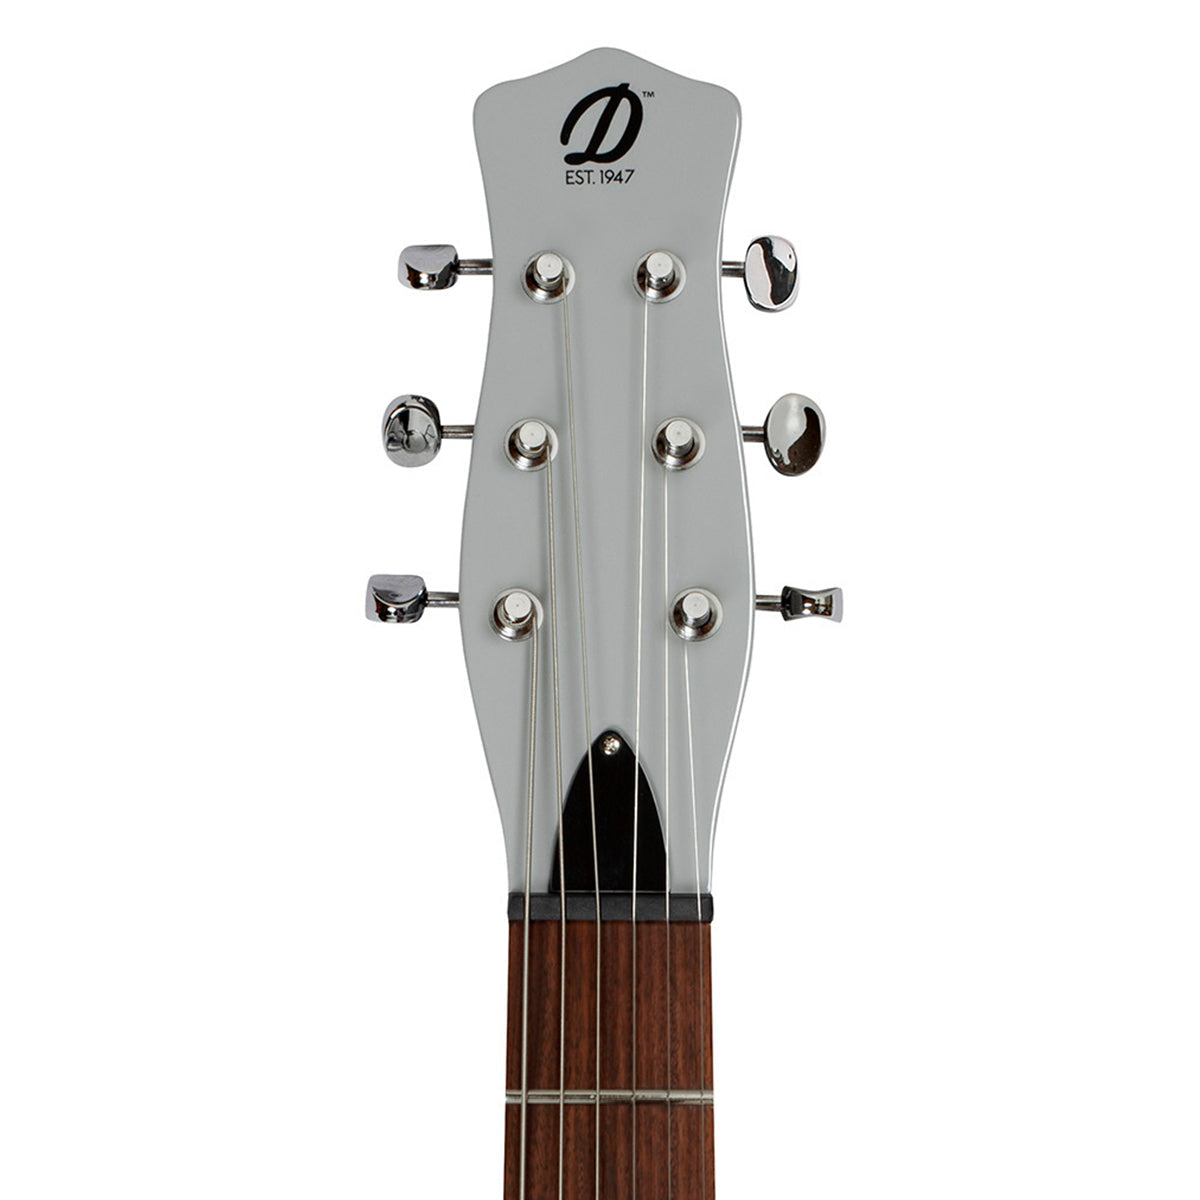 Danelectro '64XT Electric Guitar ~ Ice Grey, Electric Guitar for sale at Richards Guitars.